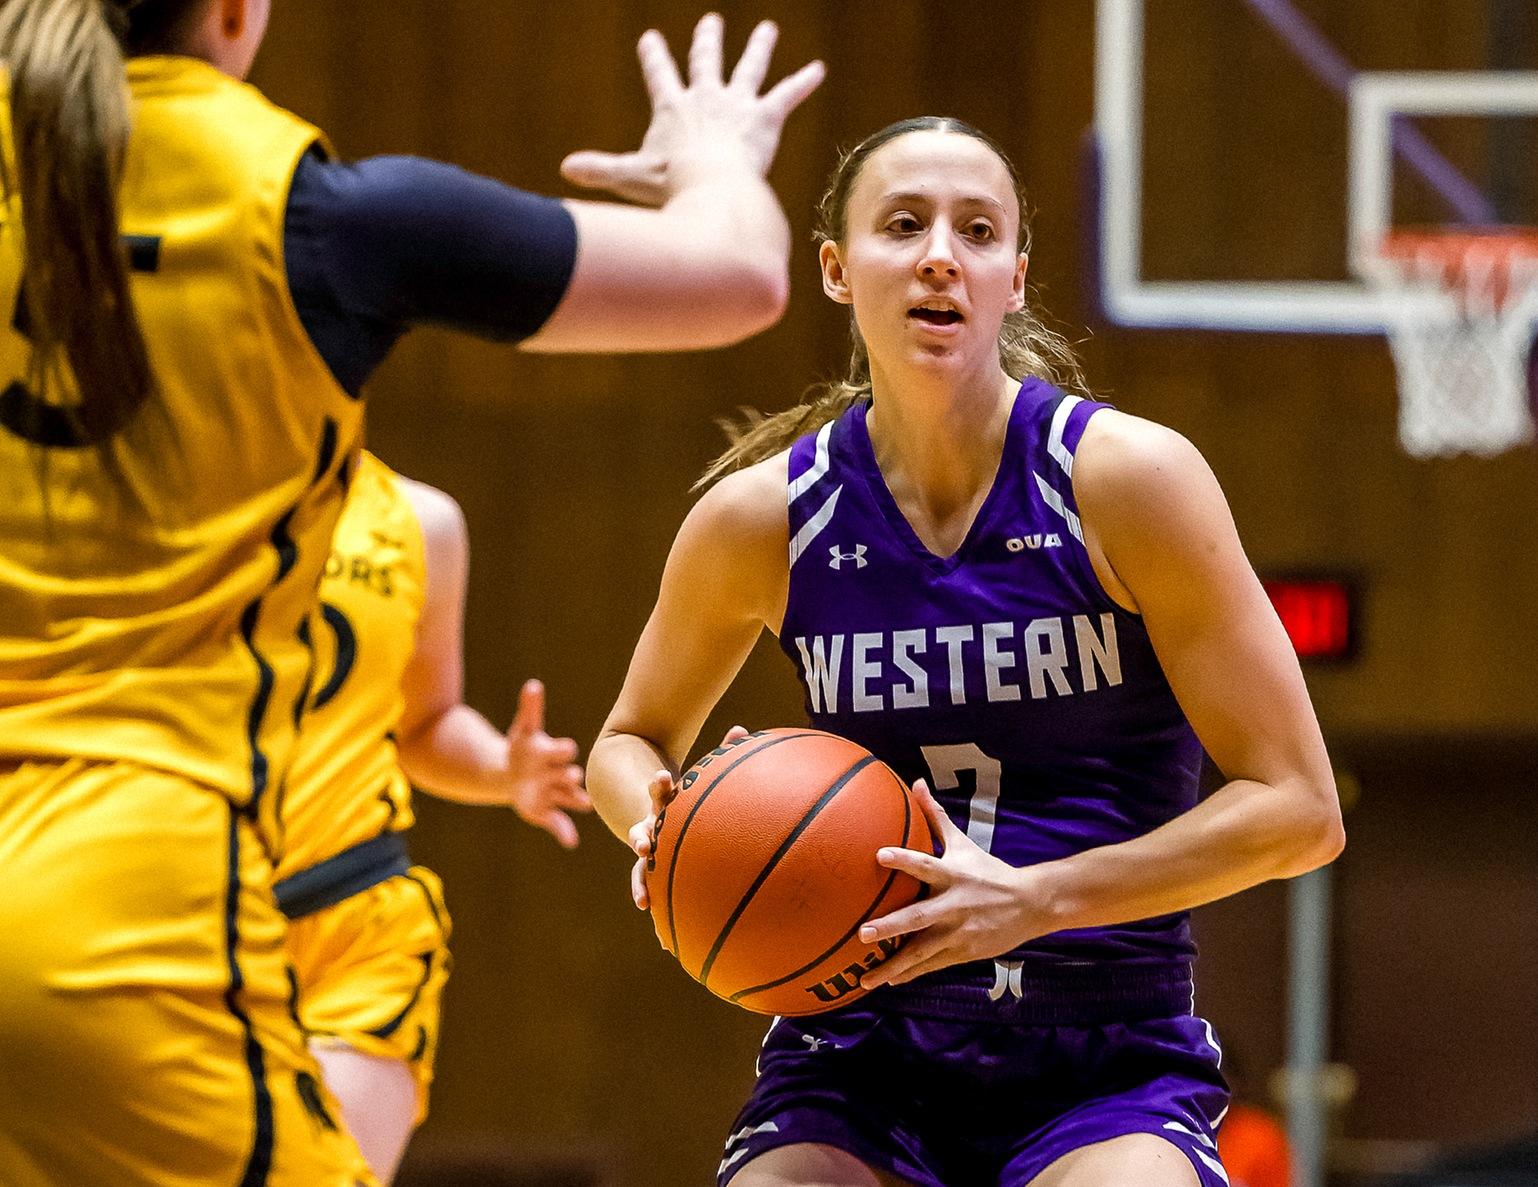 Image of a woman wearing a purple uniform that says Western on it holding a basketball. 